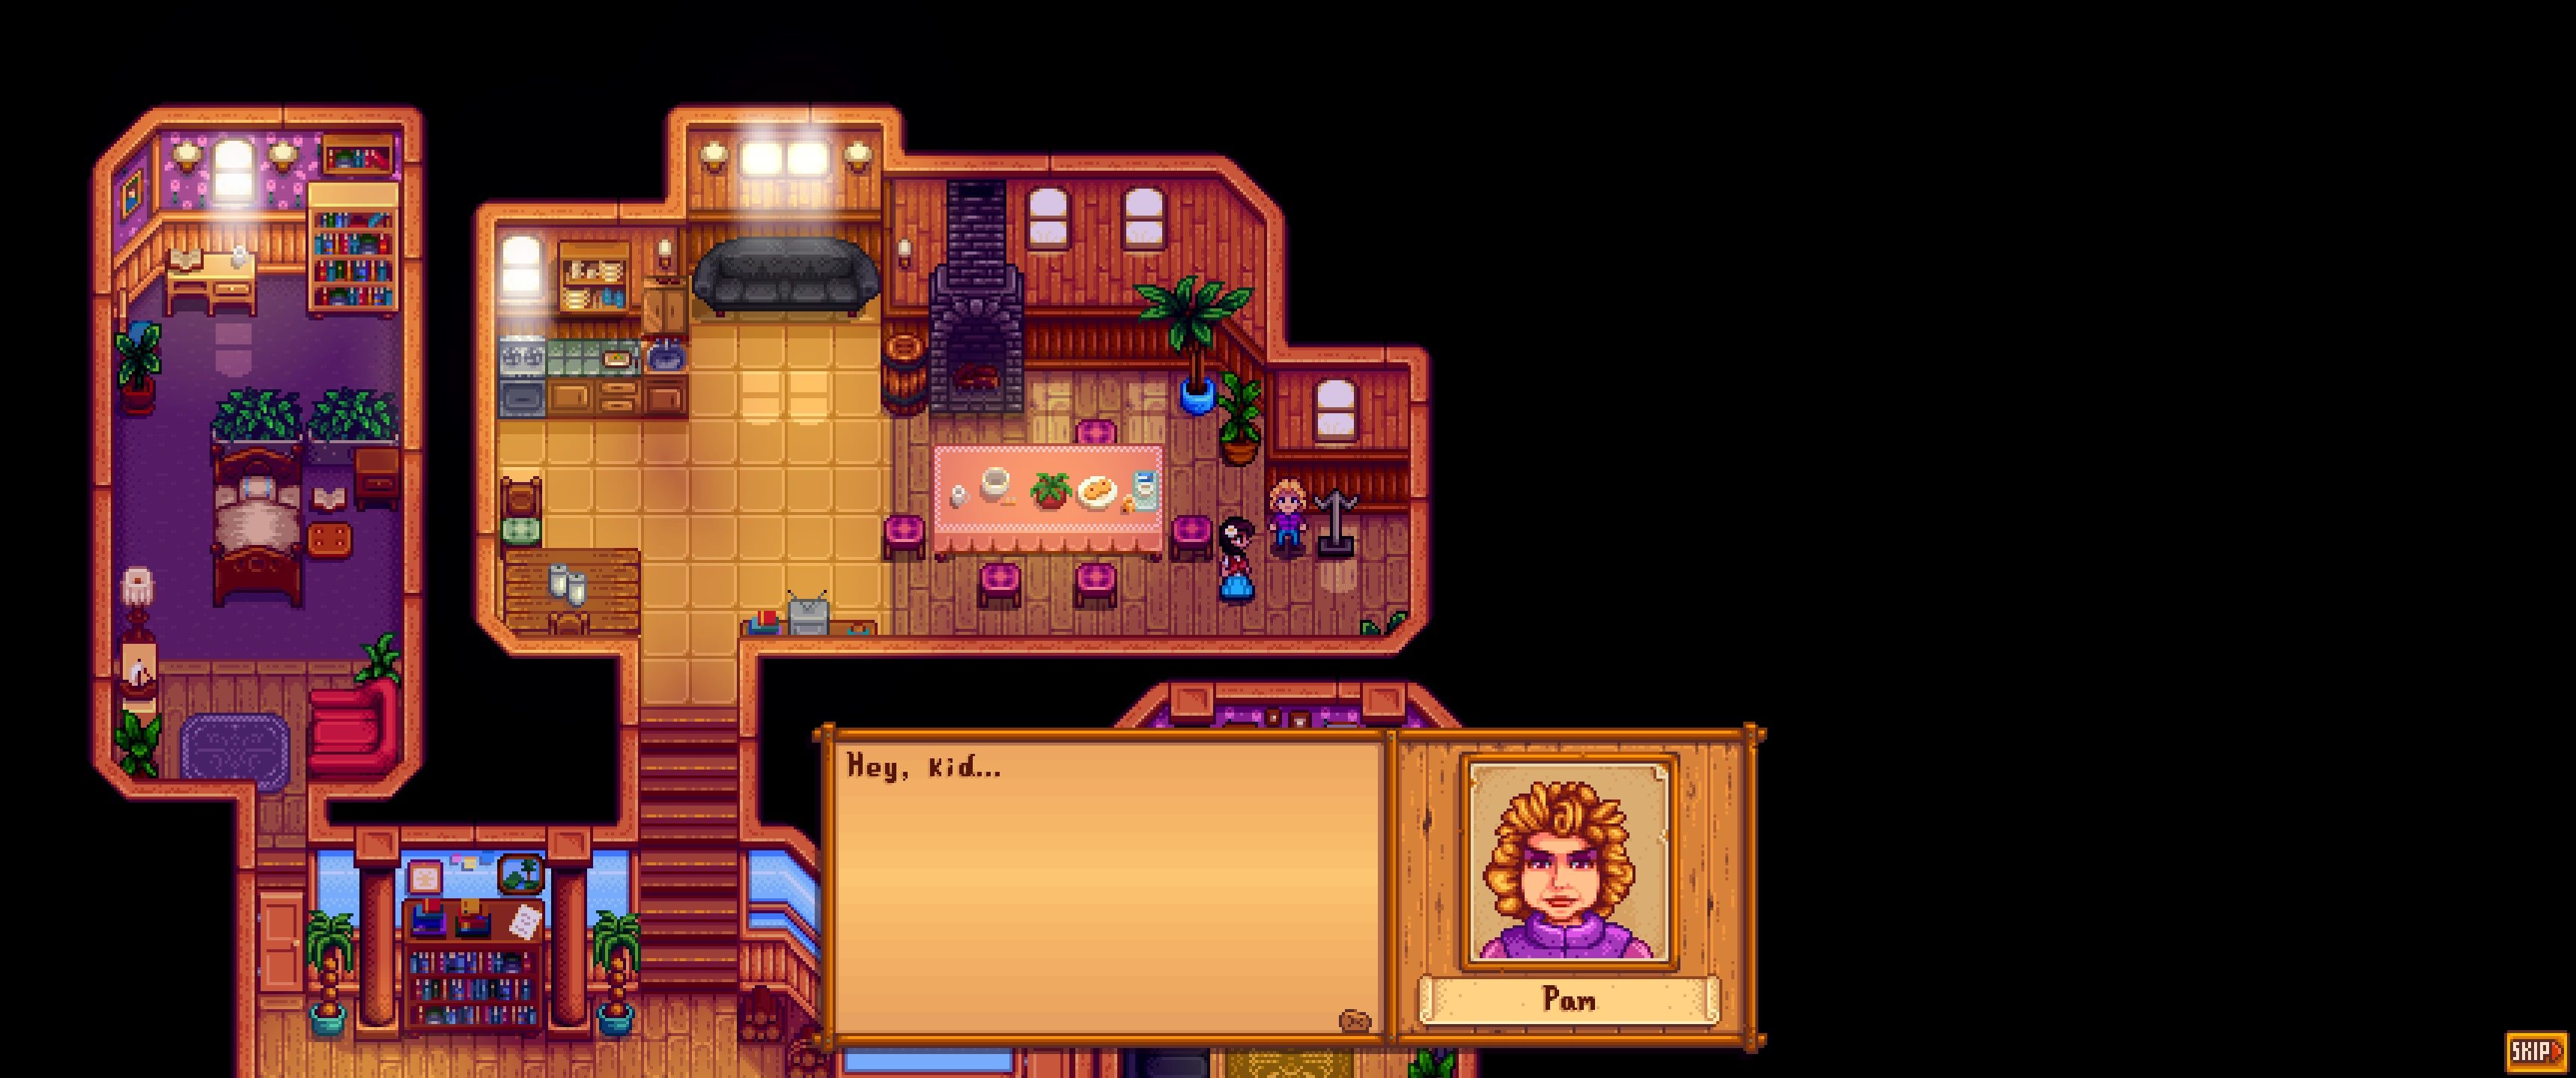 Stardew Valley: An image of Pam in dialogue with the player.